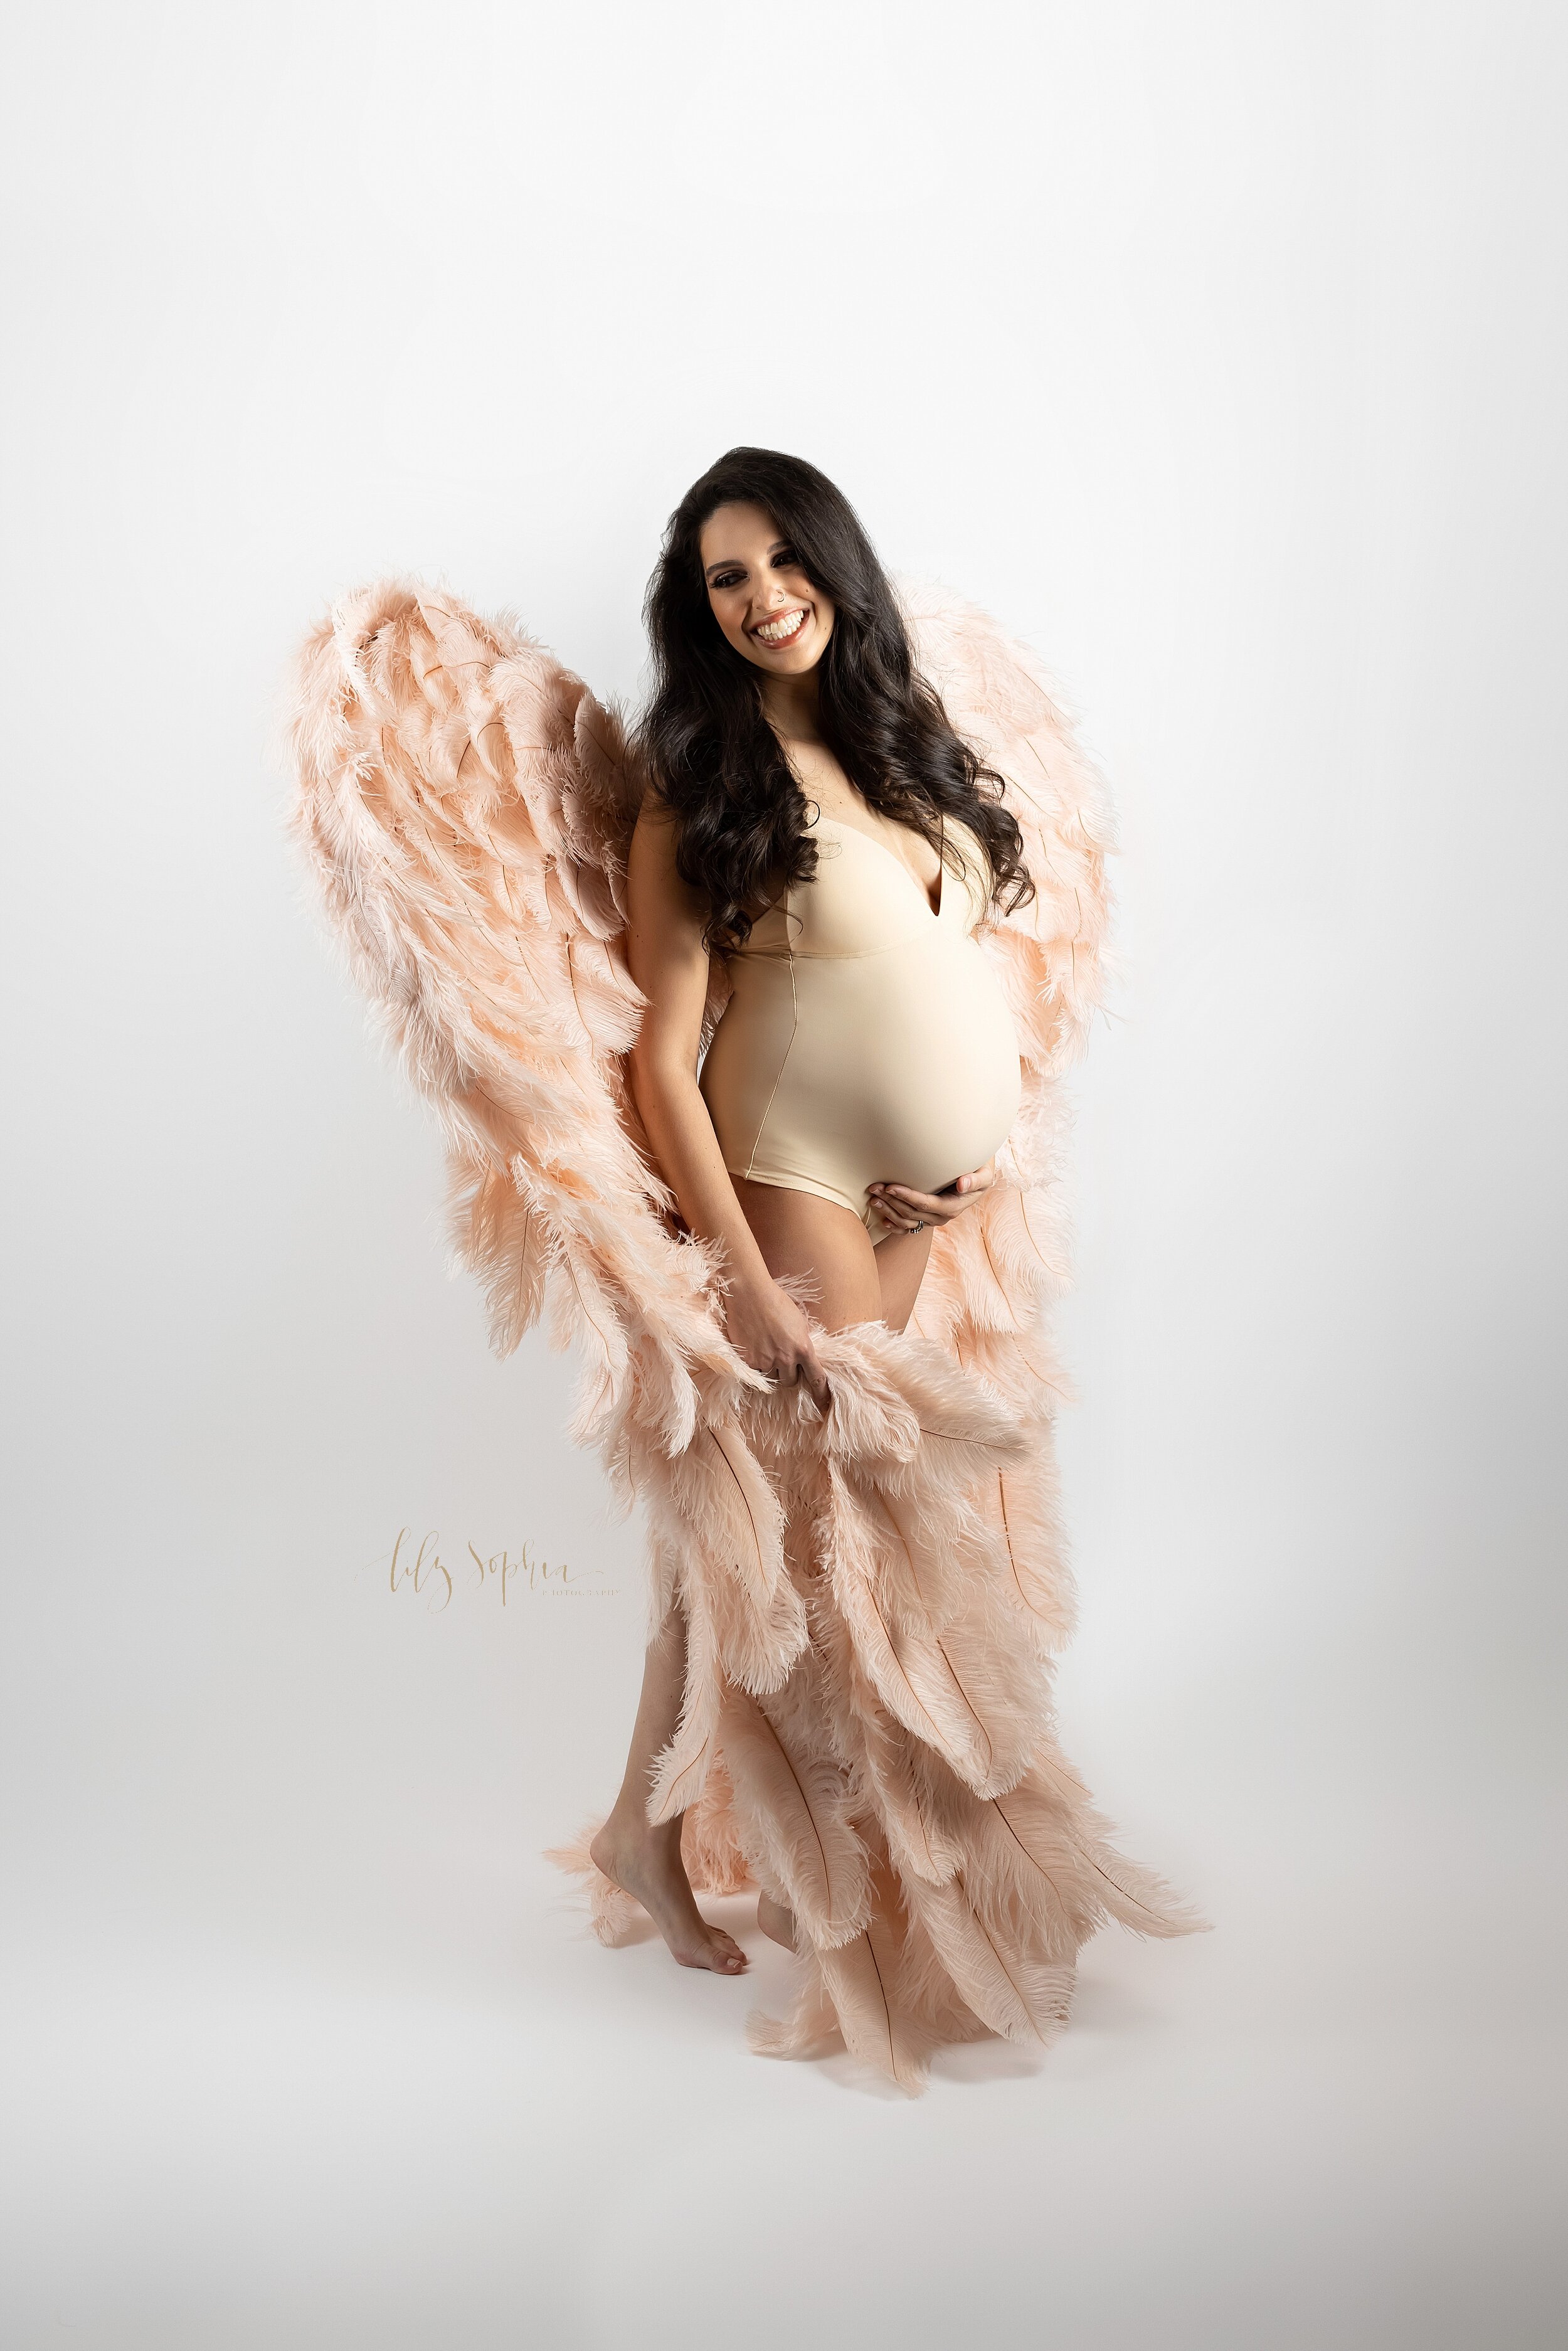  Atlanta fine art modern maternity photo of happy pregnant woman with a big smile and long brown hair wearing a nude bodysuit and blush pink feather angel wings inspired by the Victoria’s Secret runway.  